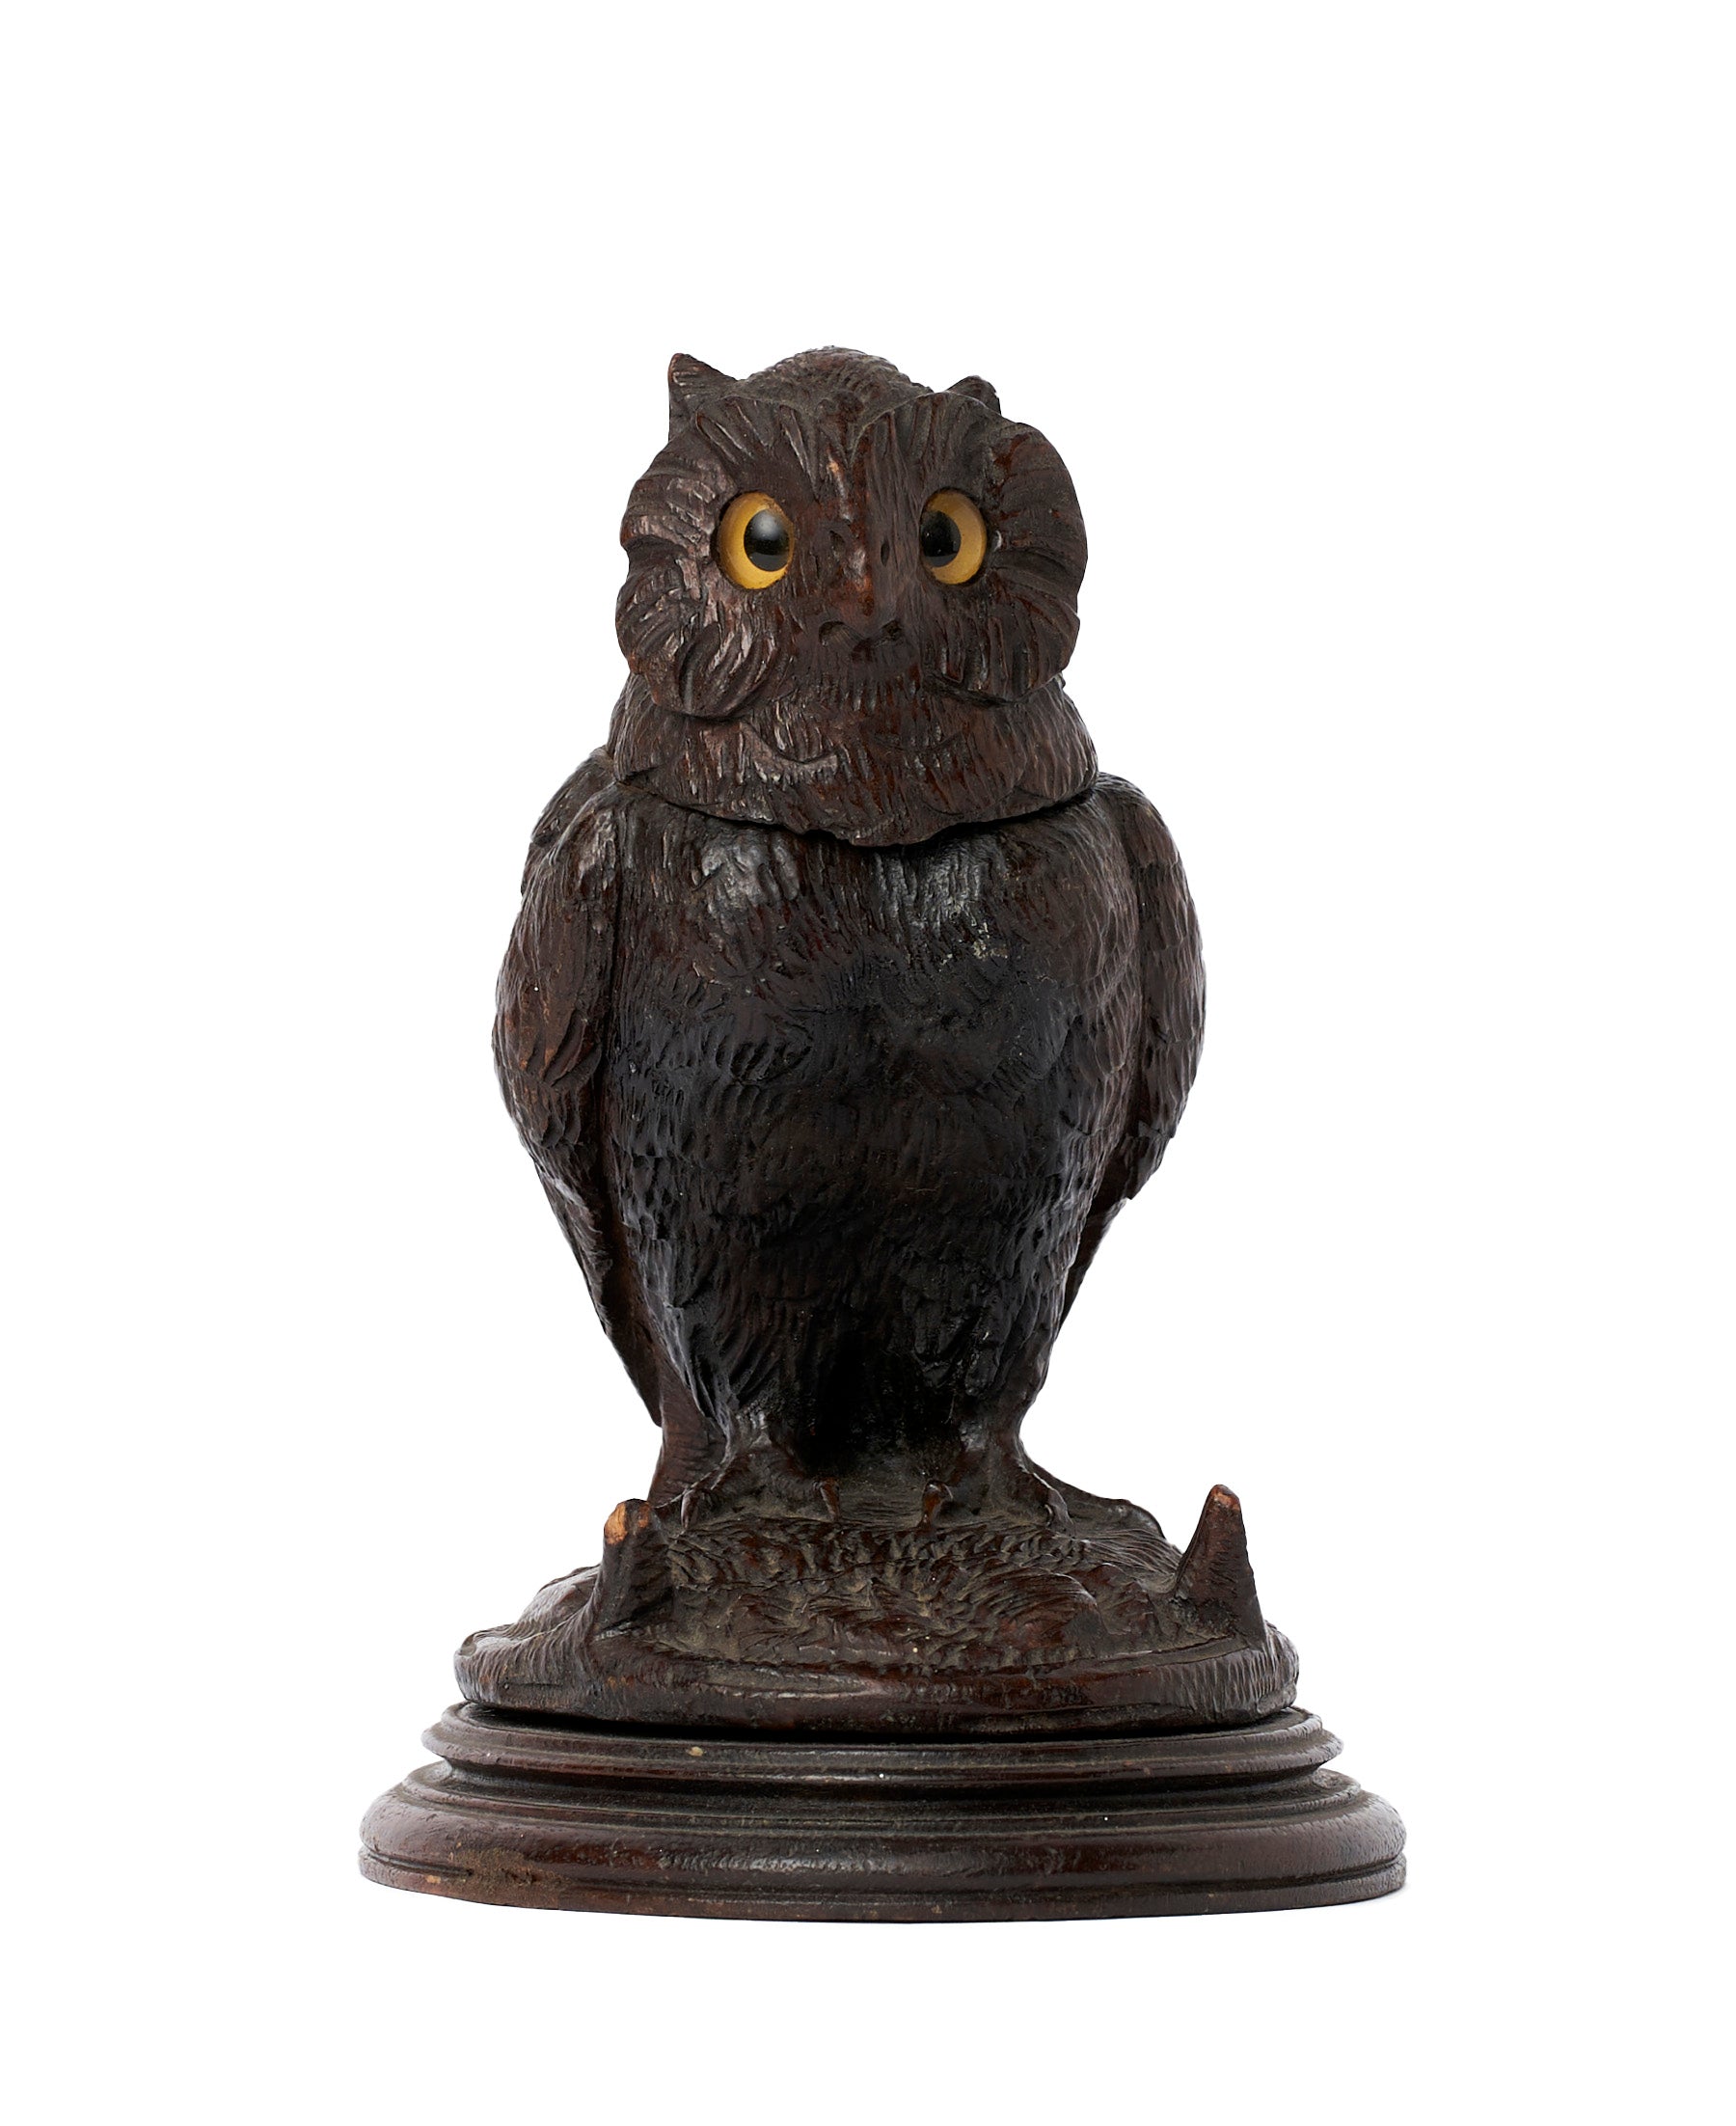 SOLD A carved wood owl-form inkwell with glass eyes, Black Forest region, 19th century